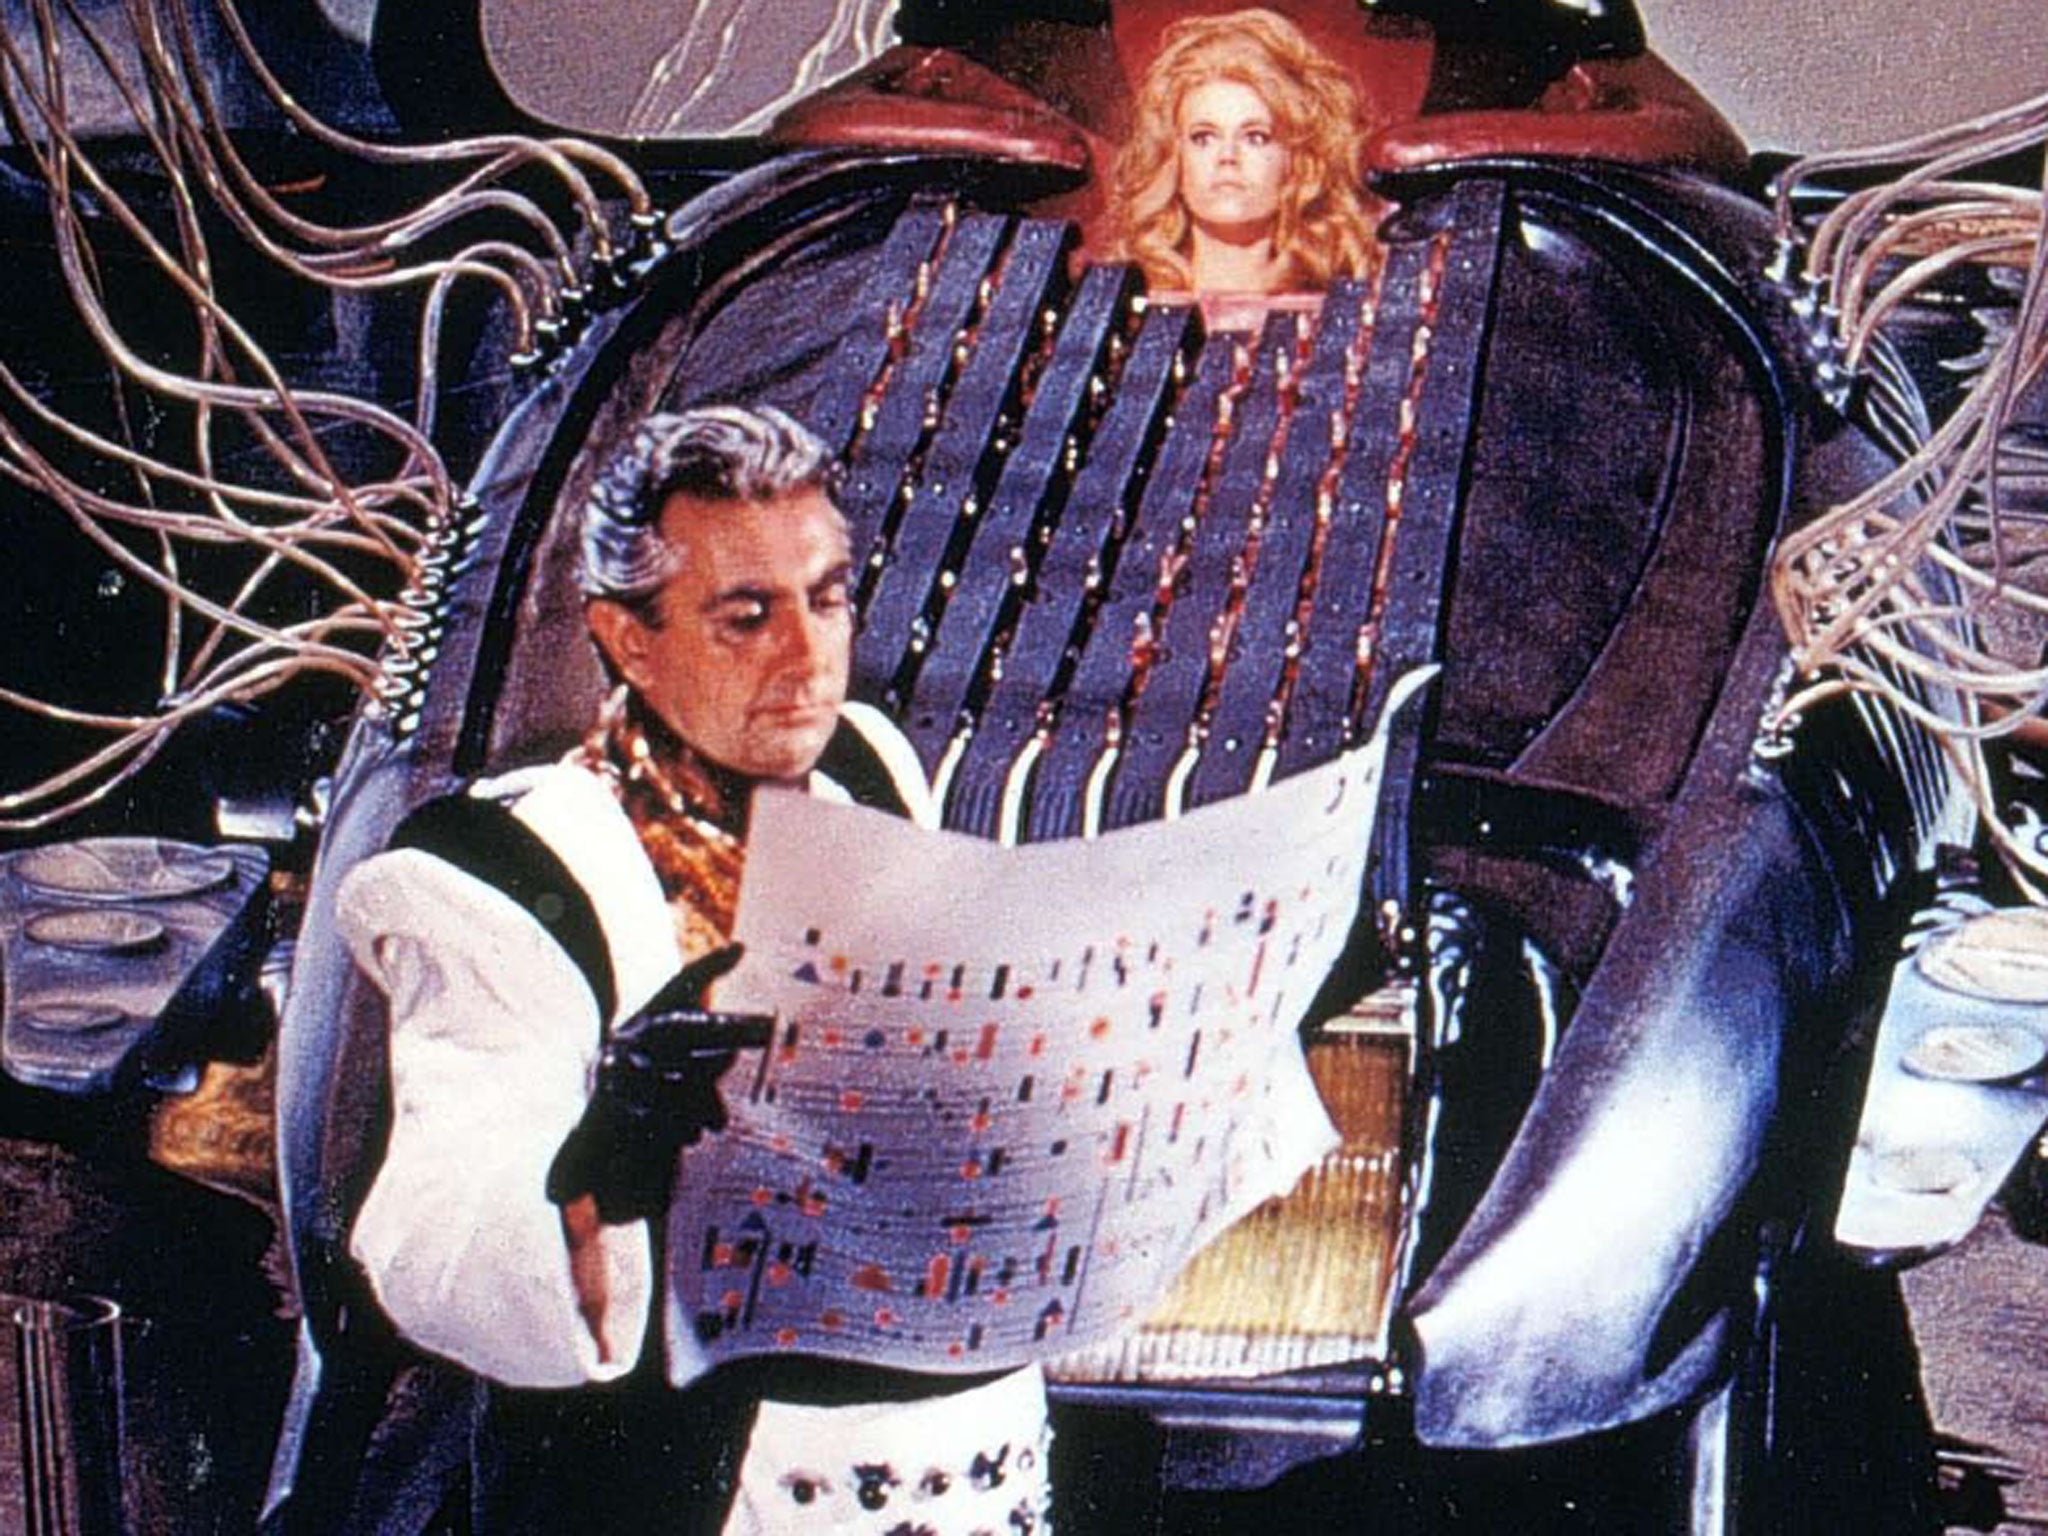 O’Shea as the inventor Durand Durand, with Jane Fonda in Roger Vadim’s cult classic ‘Barbarella’